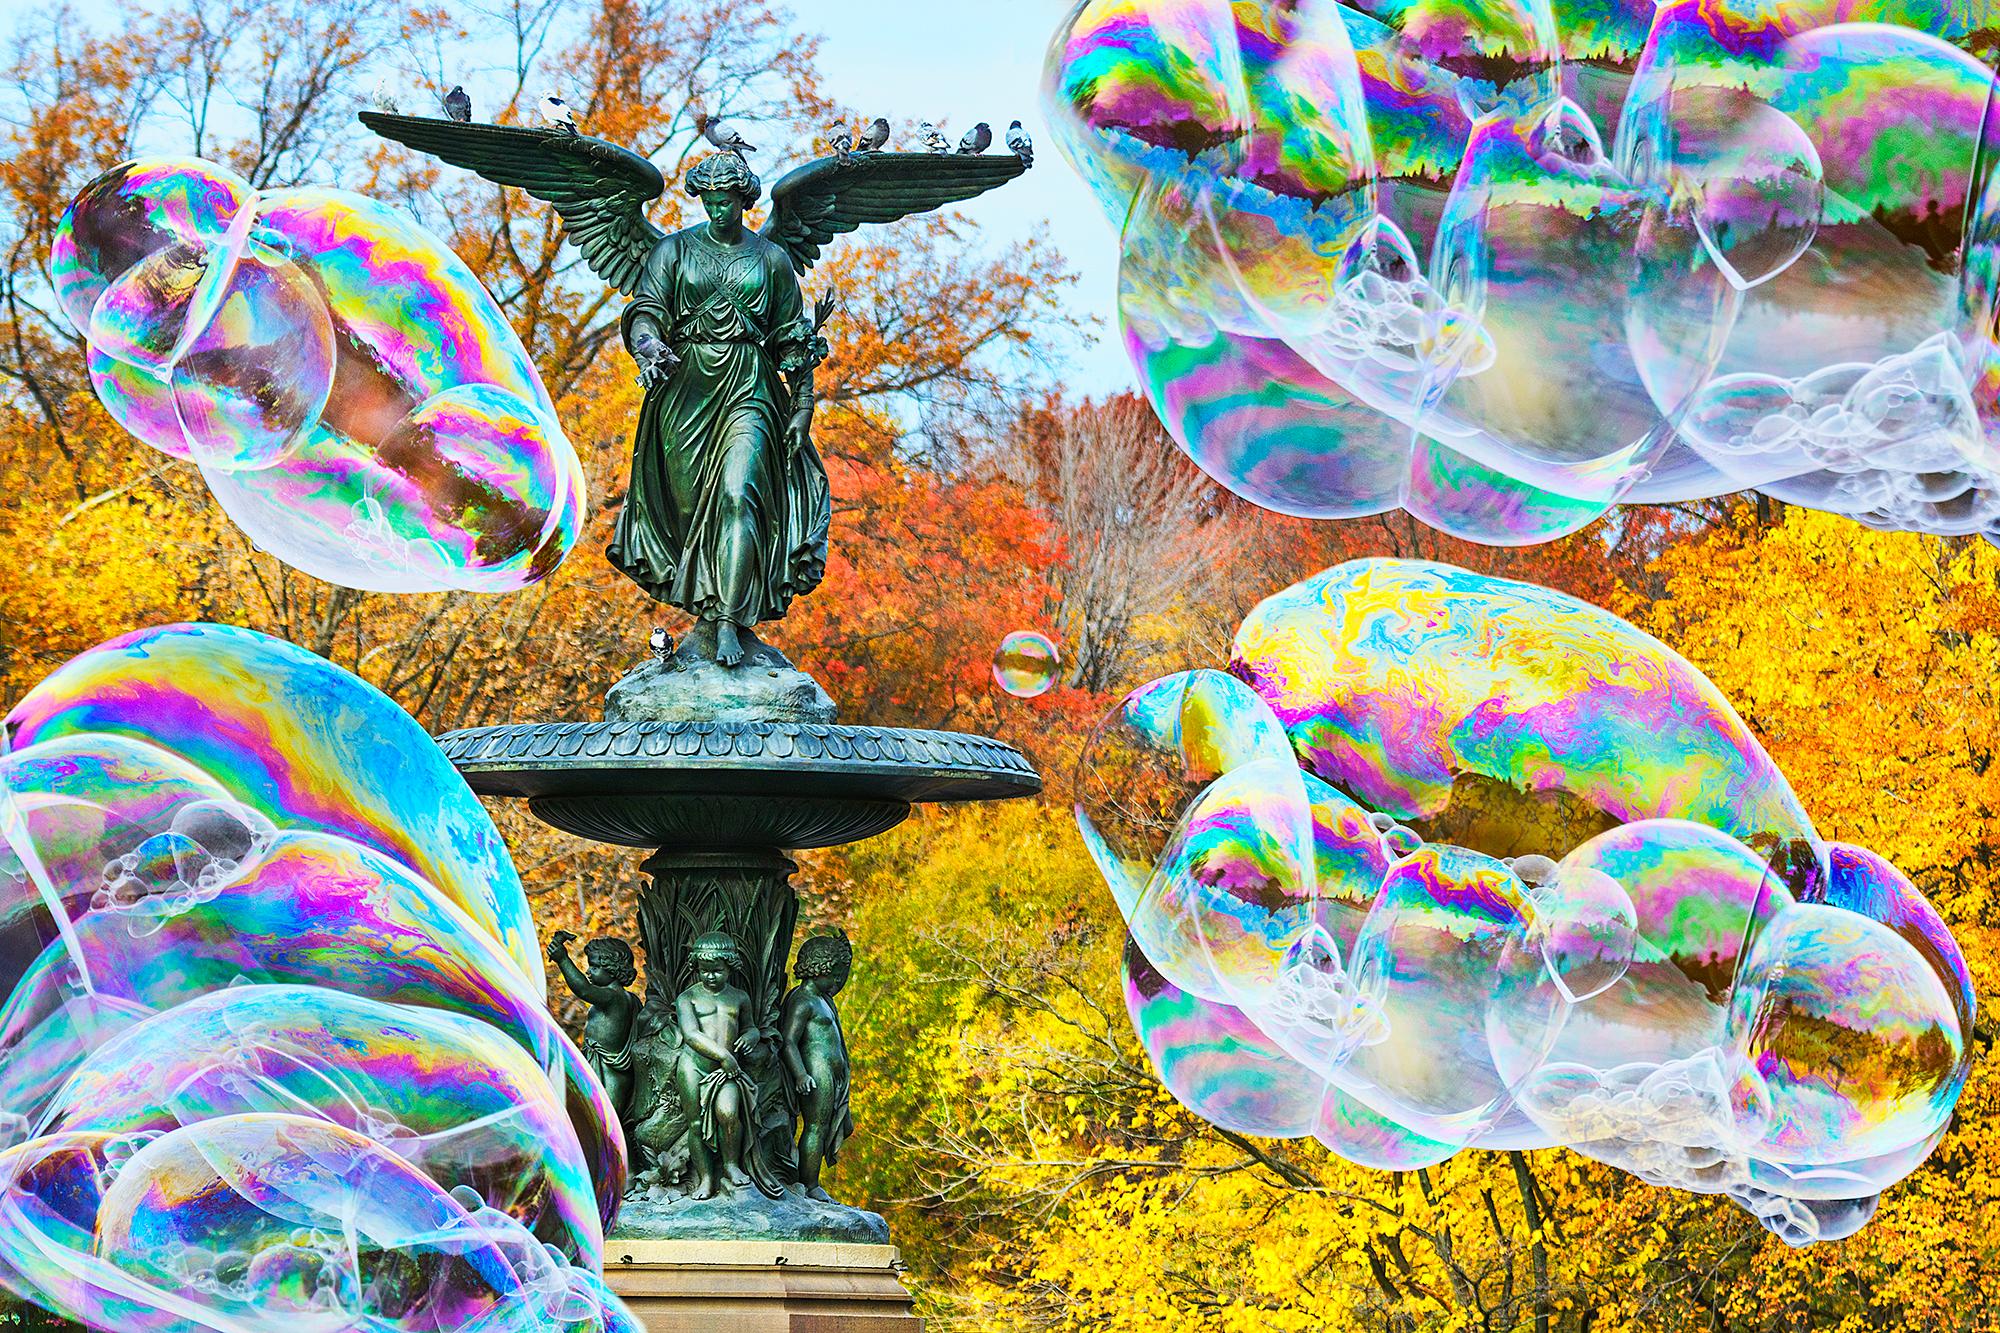 Big Bubbles and the Bethesda Fountain.  